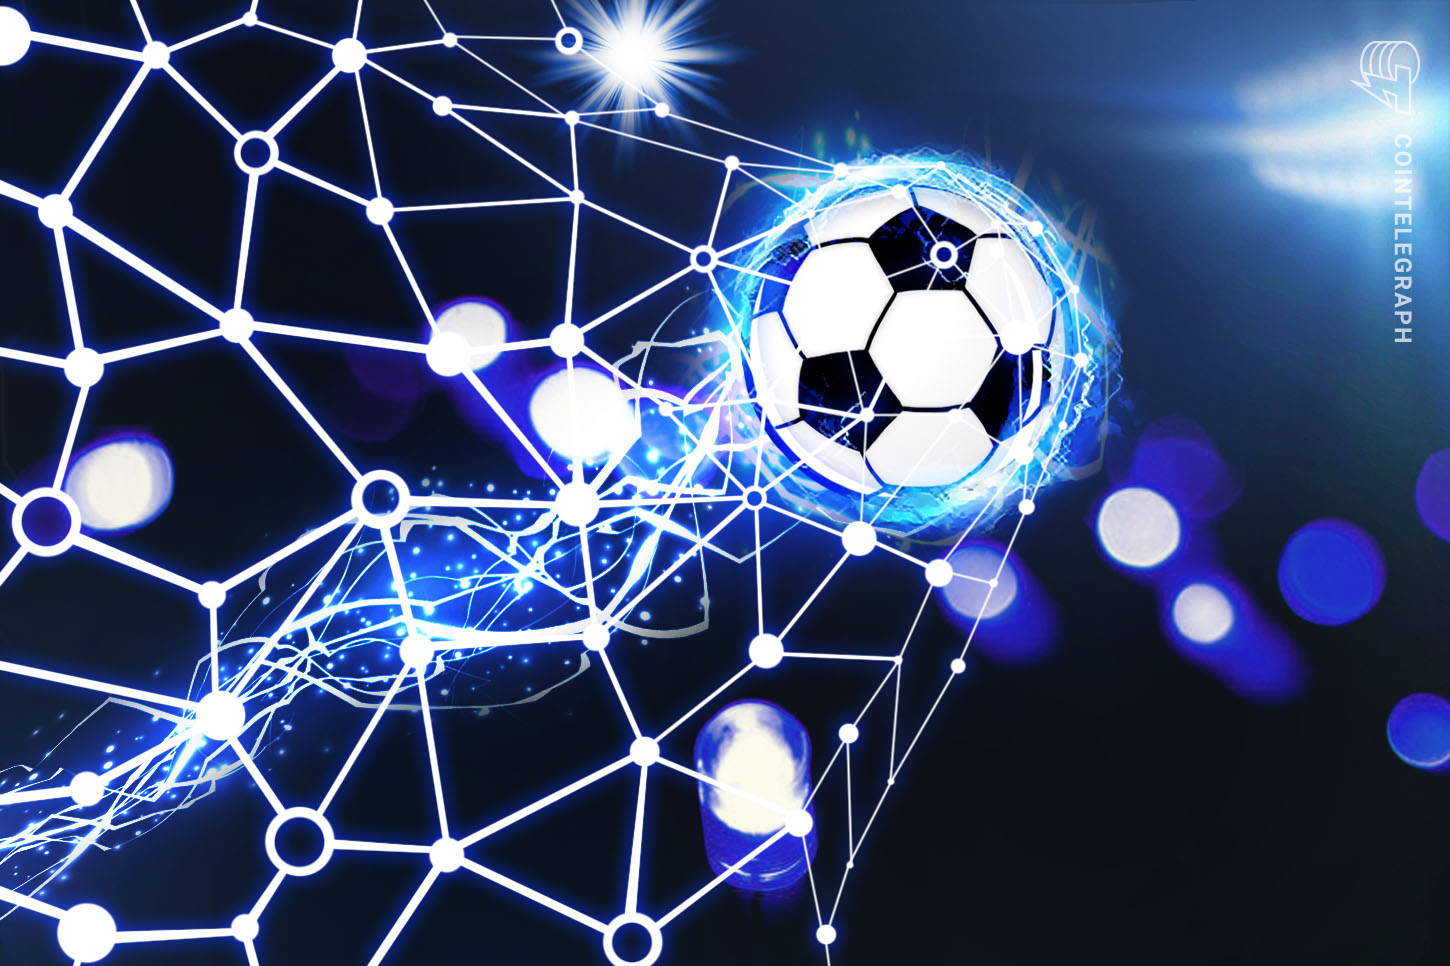 One other Turkish soccer membership is capitalizing on blockchain insanity